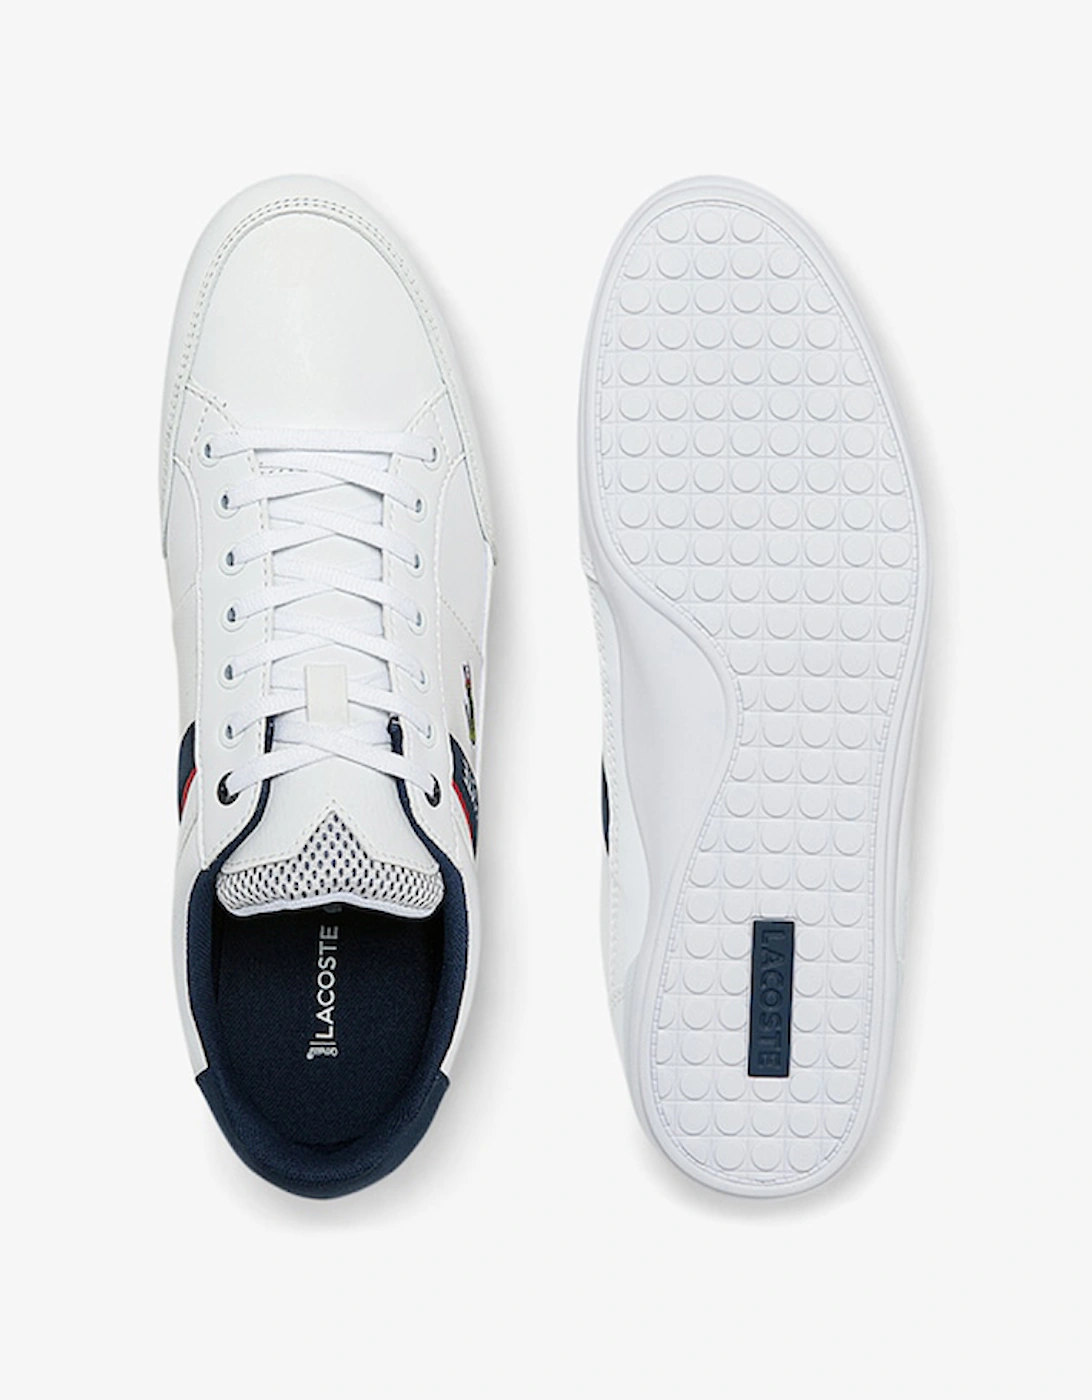 Men's Chaymon Textile and Synthetic Trainers